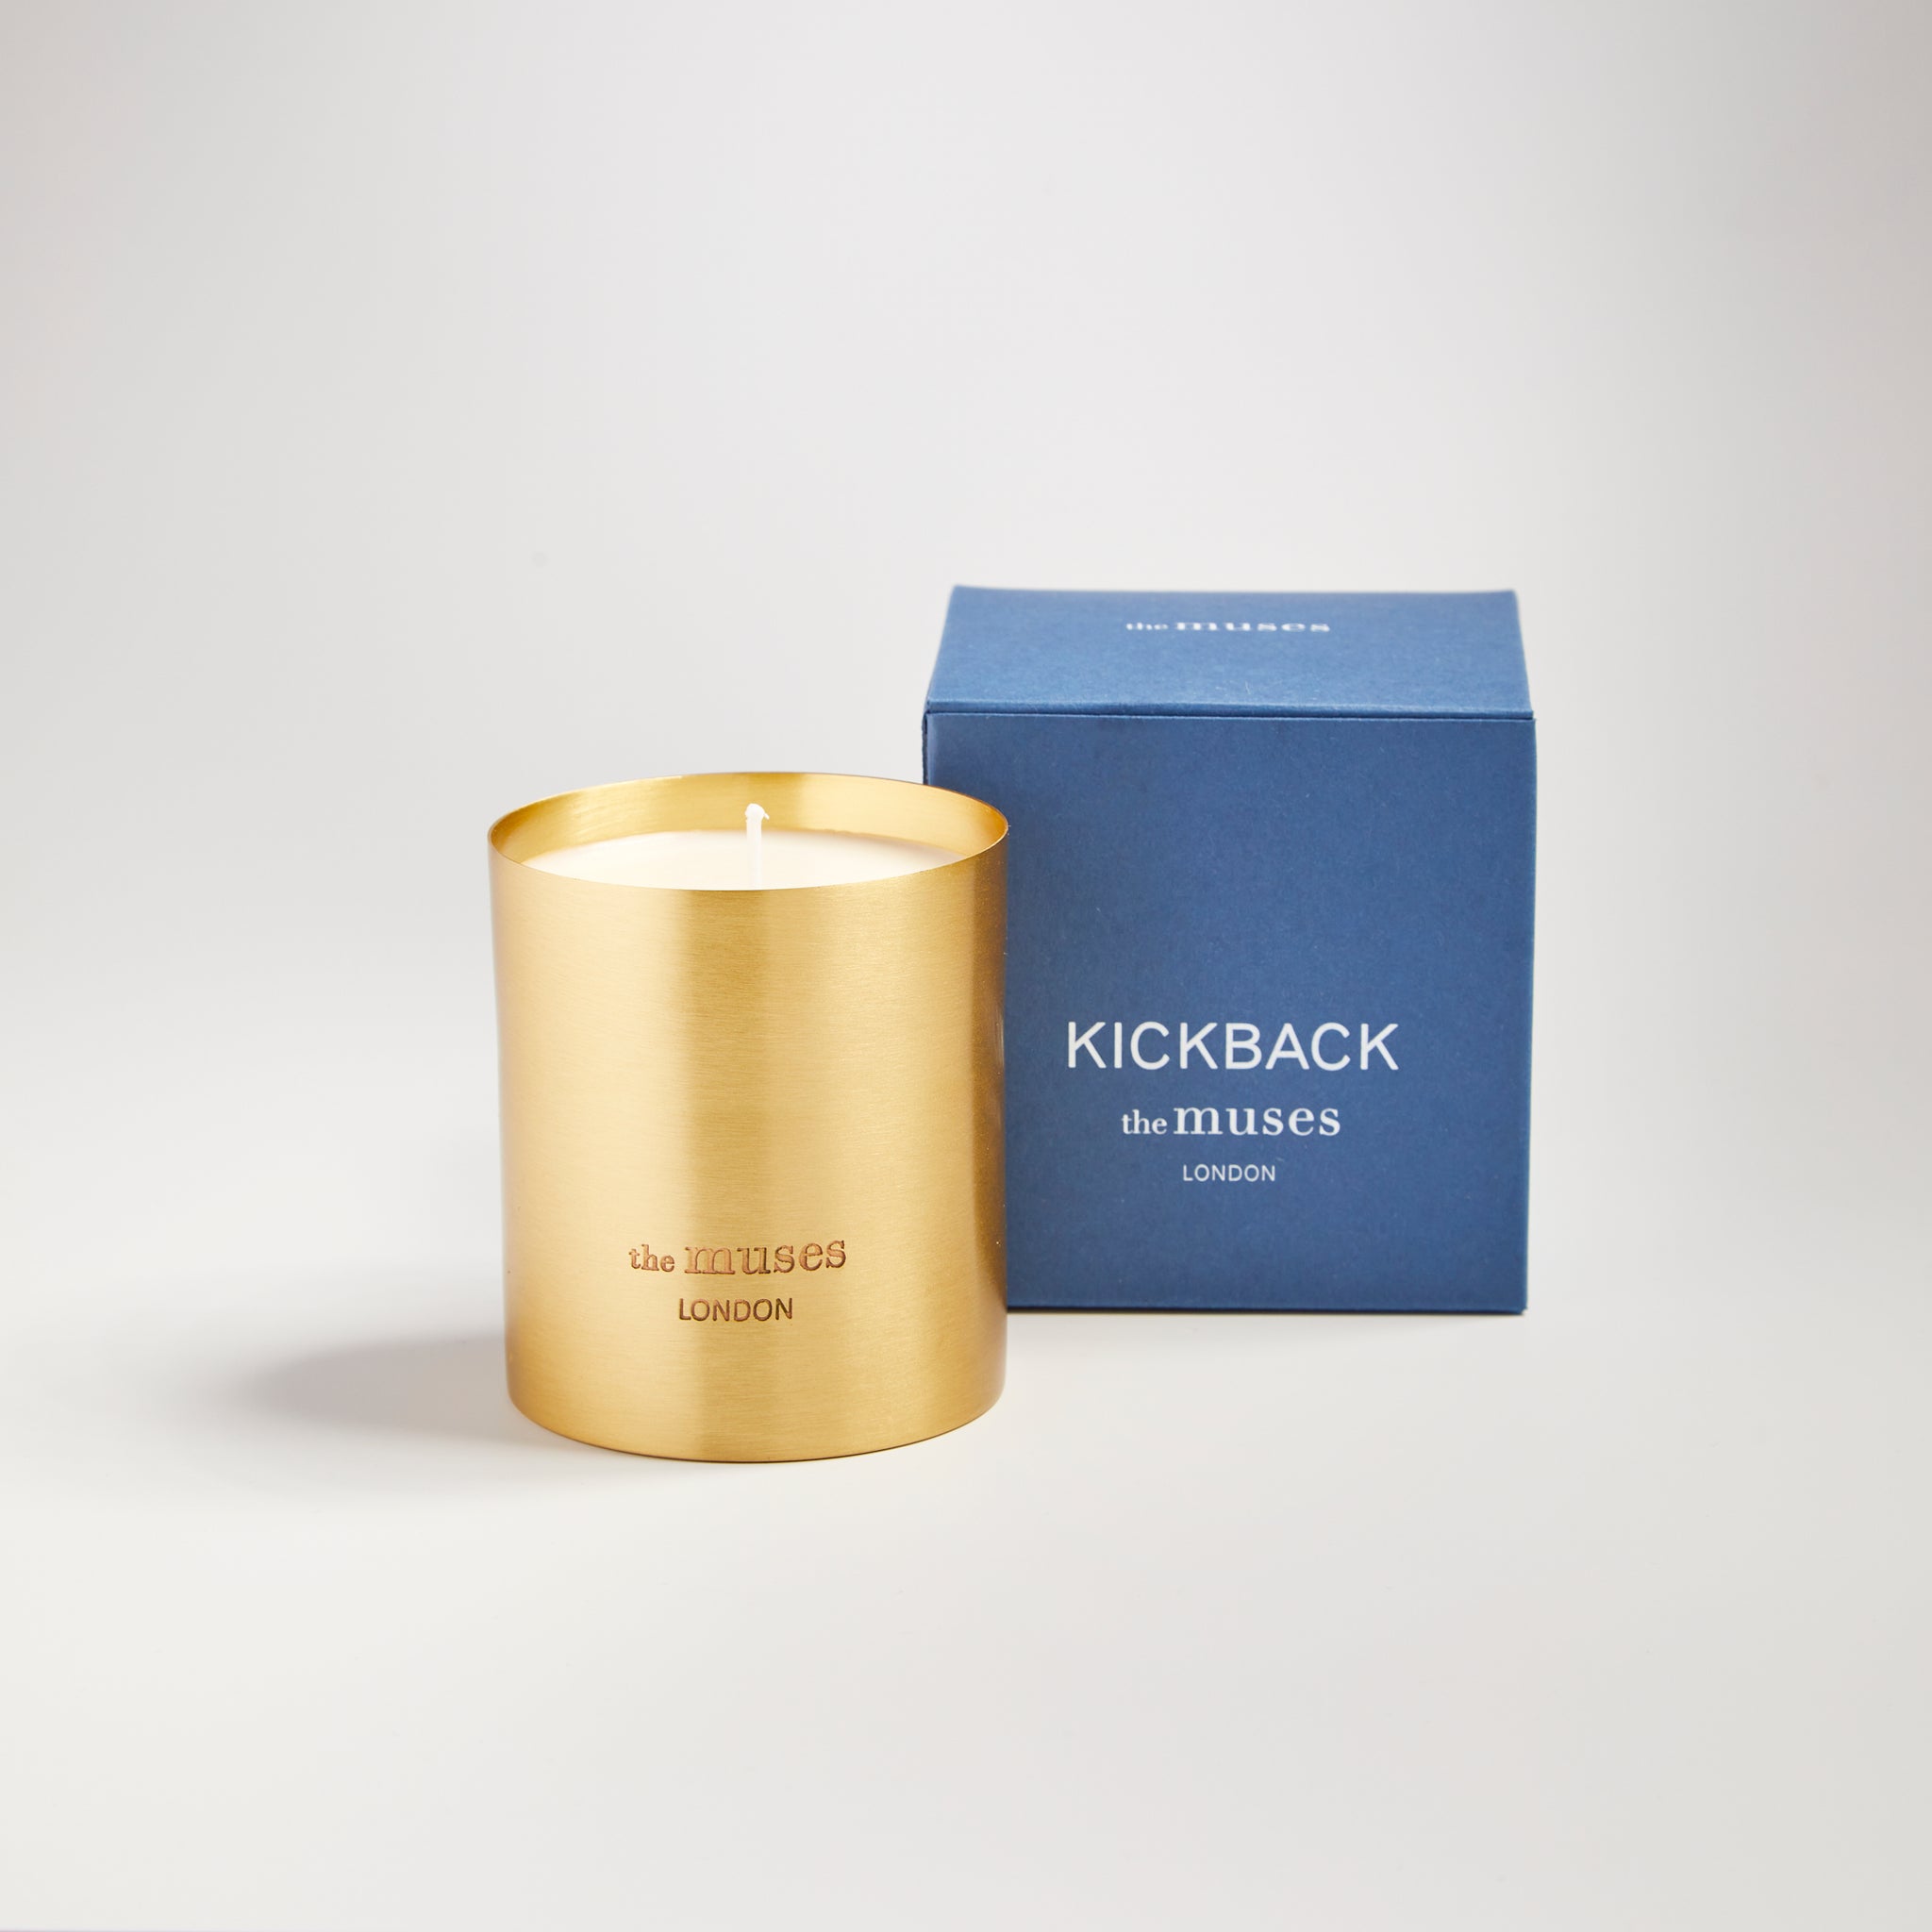 Kickback scented 100% natural wax candle 220g in pure brass container next to blue candle box with closed lid. Front